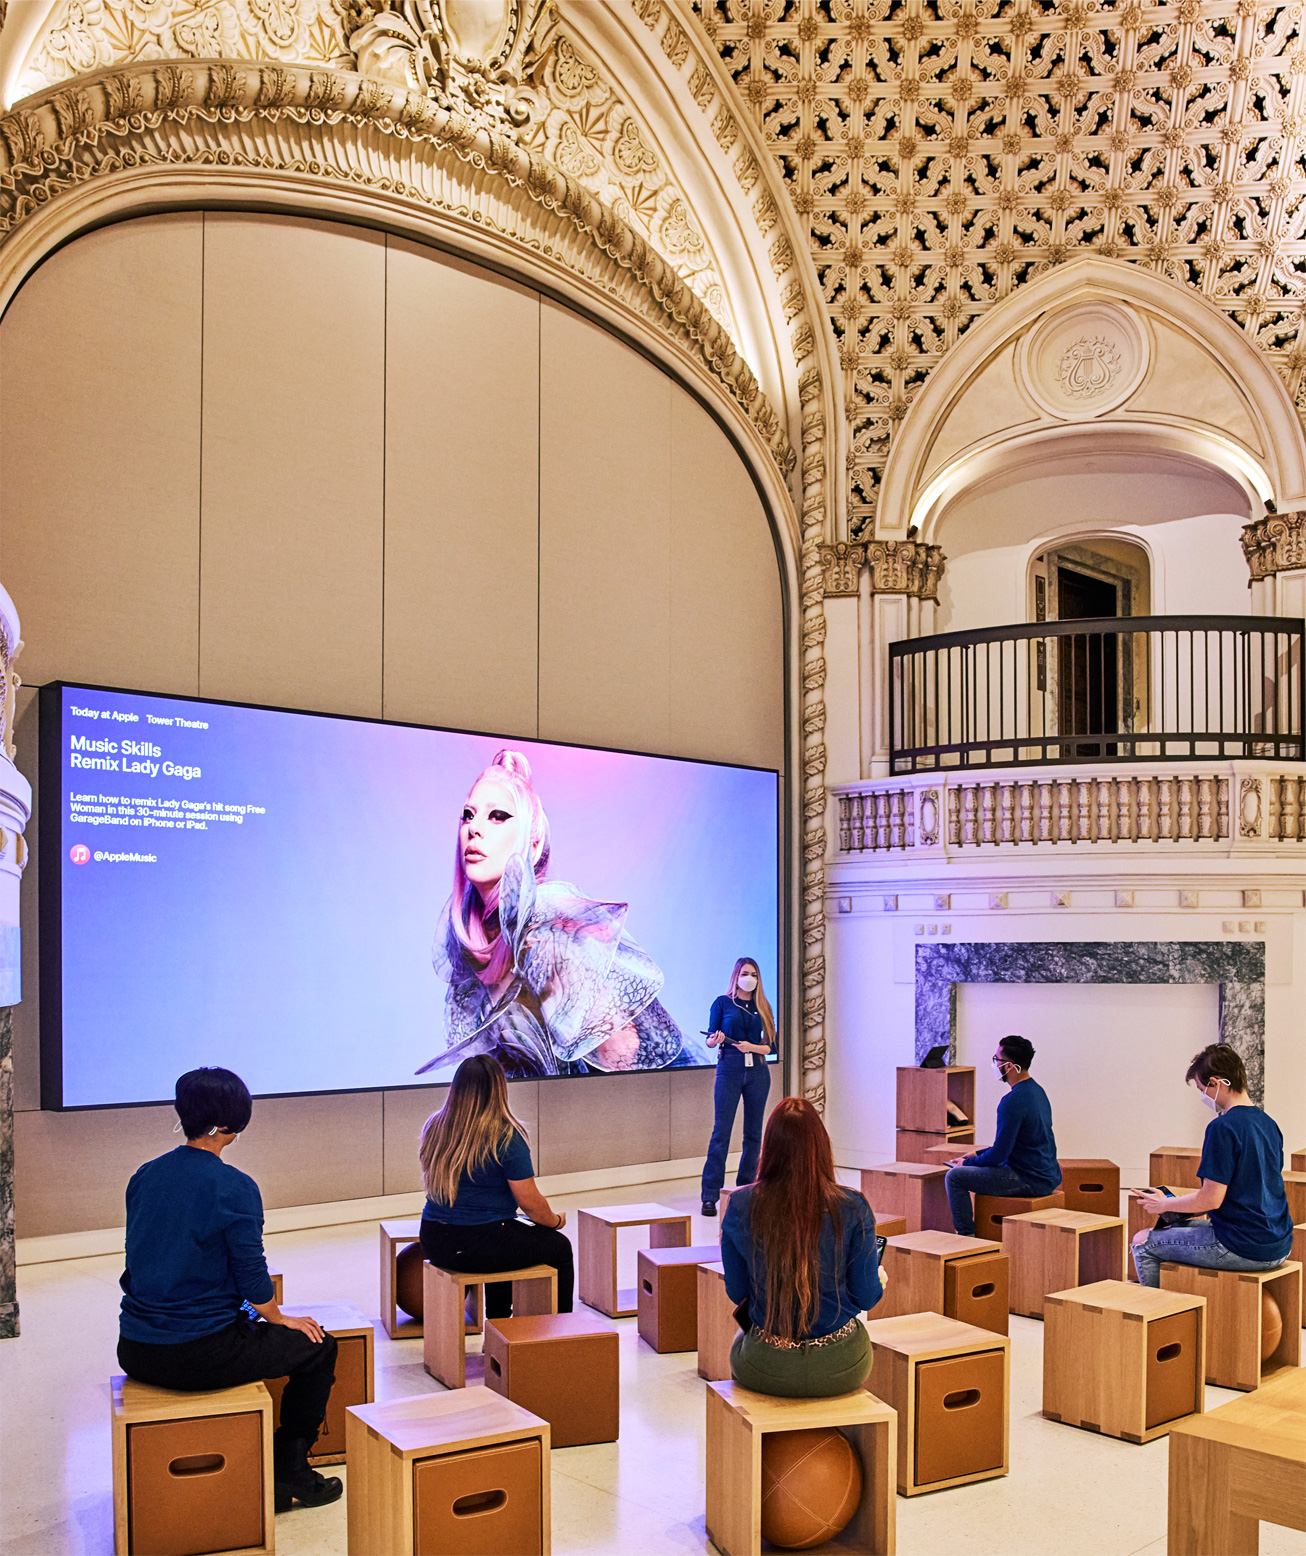 A photograph showing people in an Apple store participating in the new Today at Apple remixing sessions in GarageBand featuring Lady GaGa music